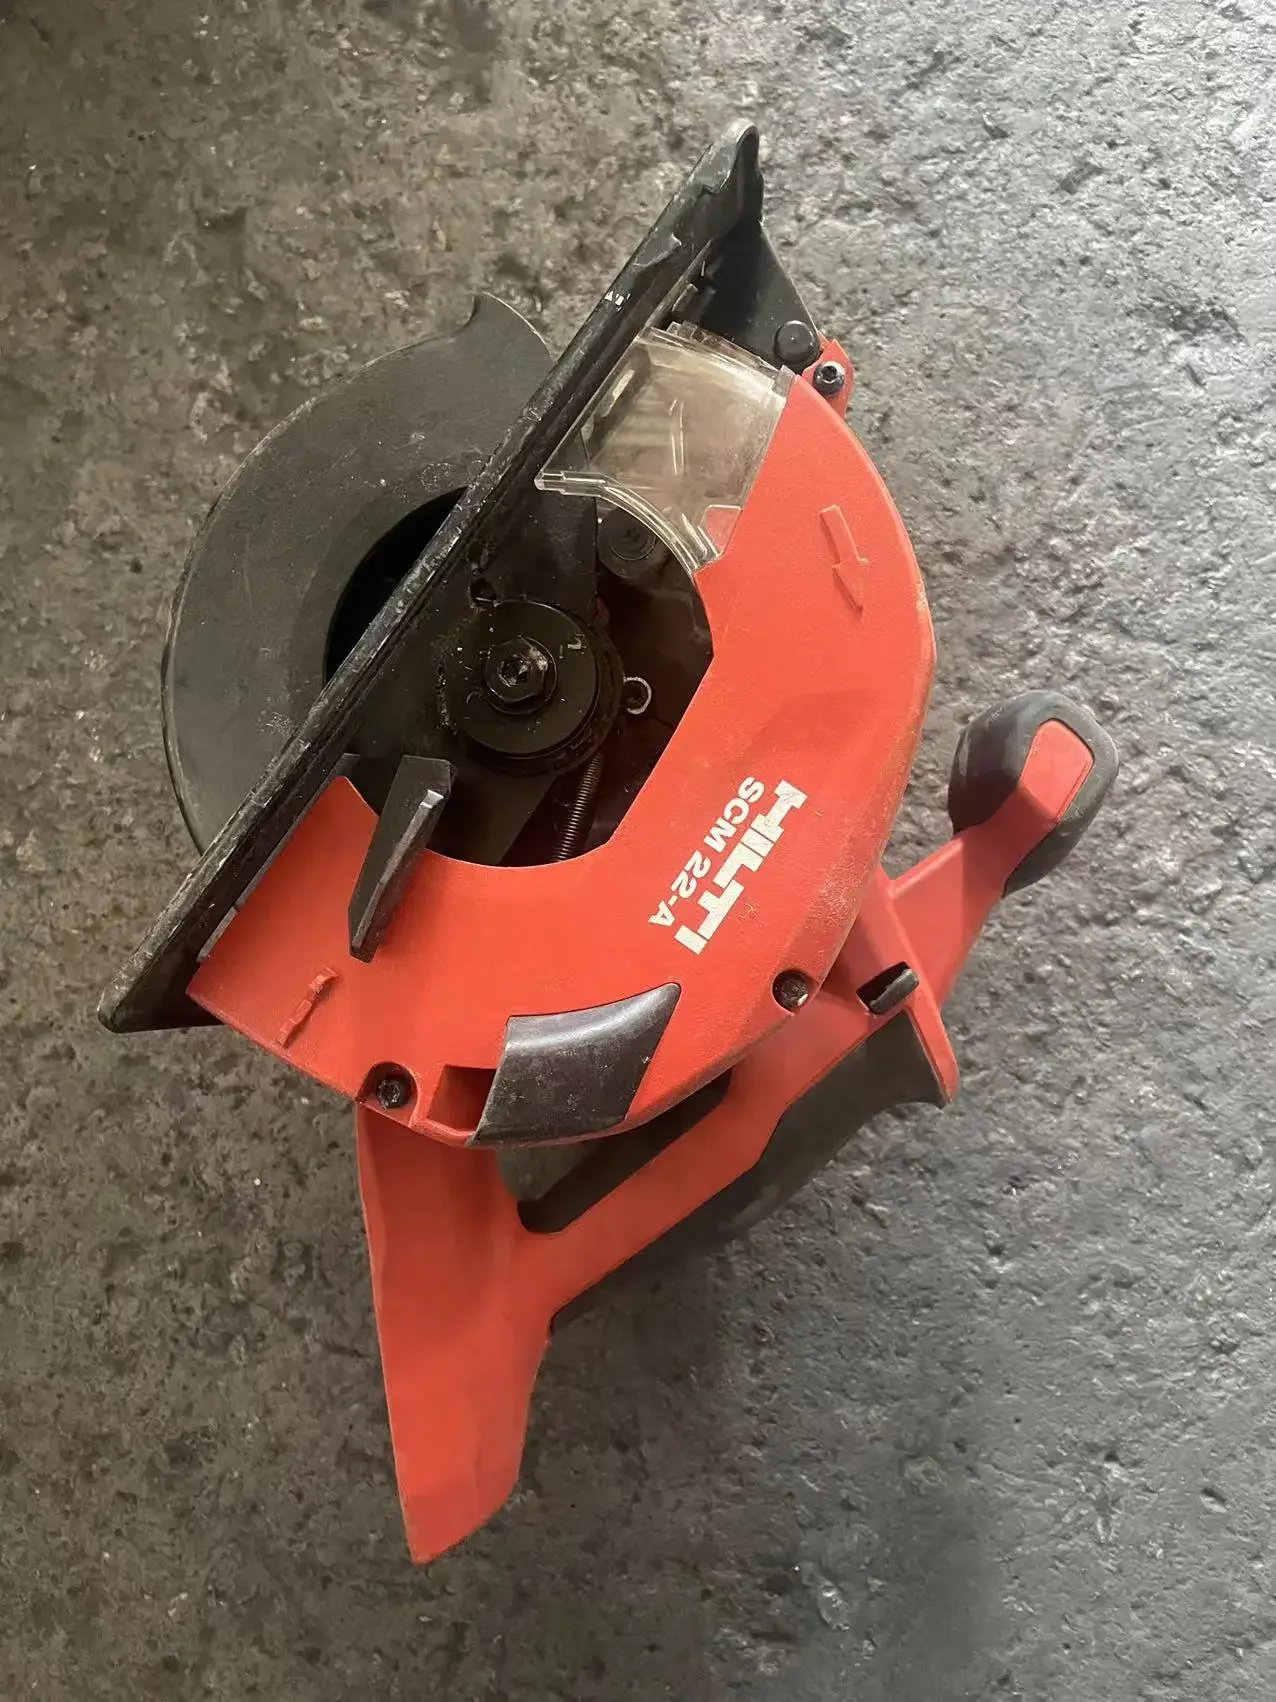 Hilti SCM 22-A Metal cutting Cordless Saw,USED,SECOND  HAND used hilti 14 4v 1 6ah in perfect working order second hand